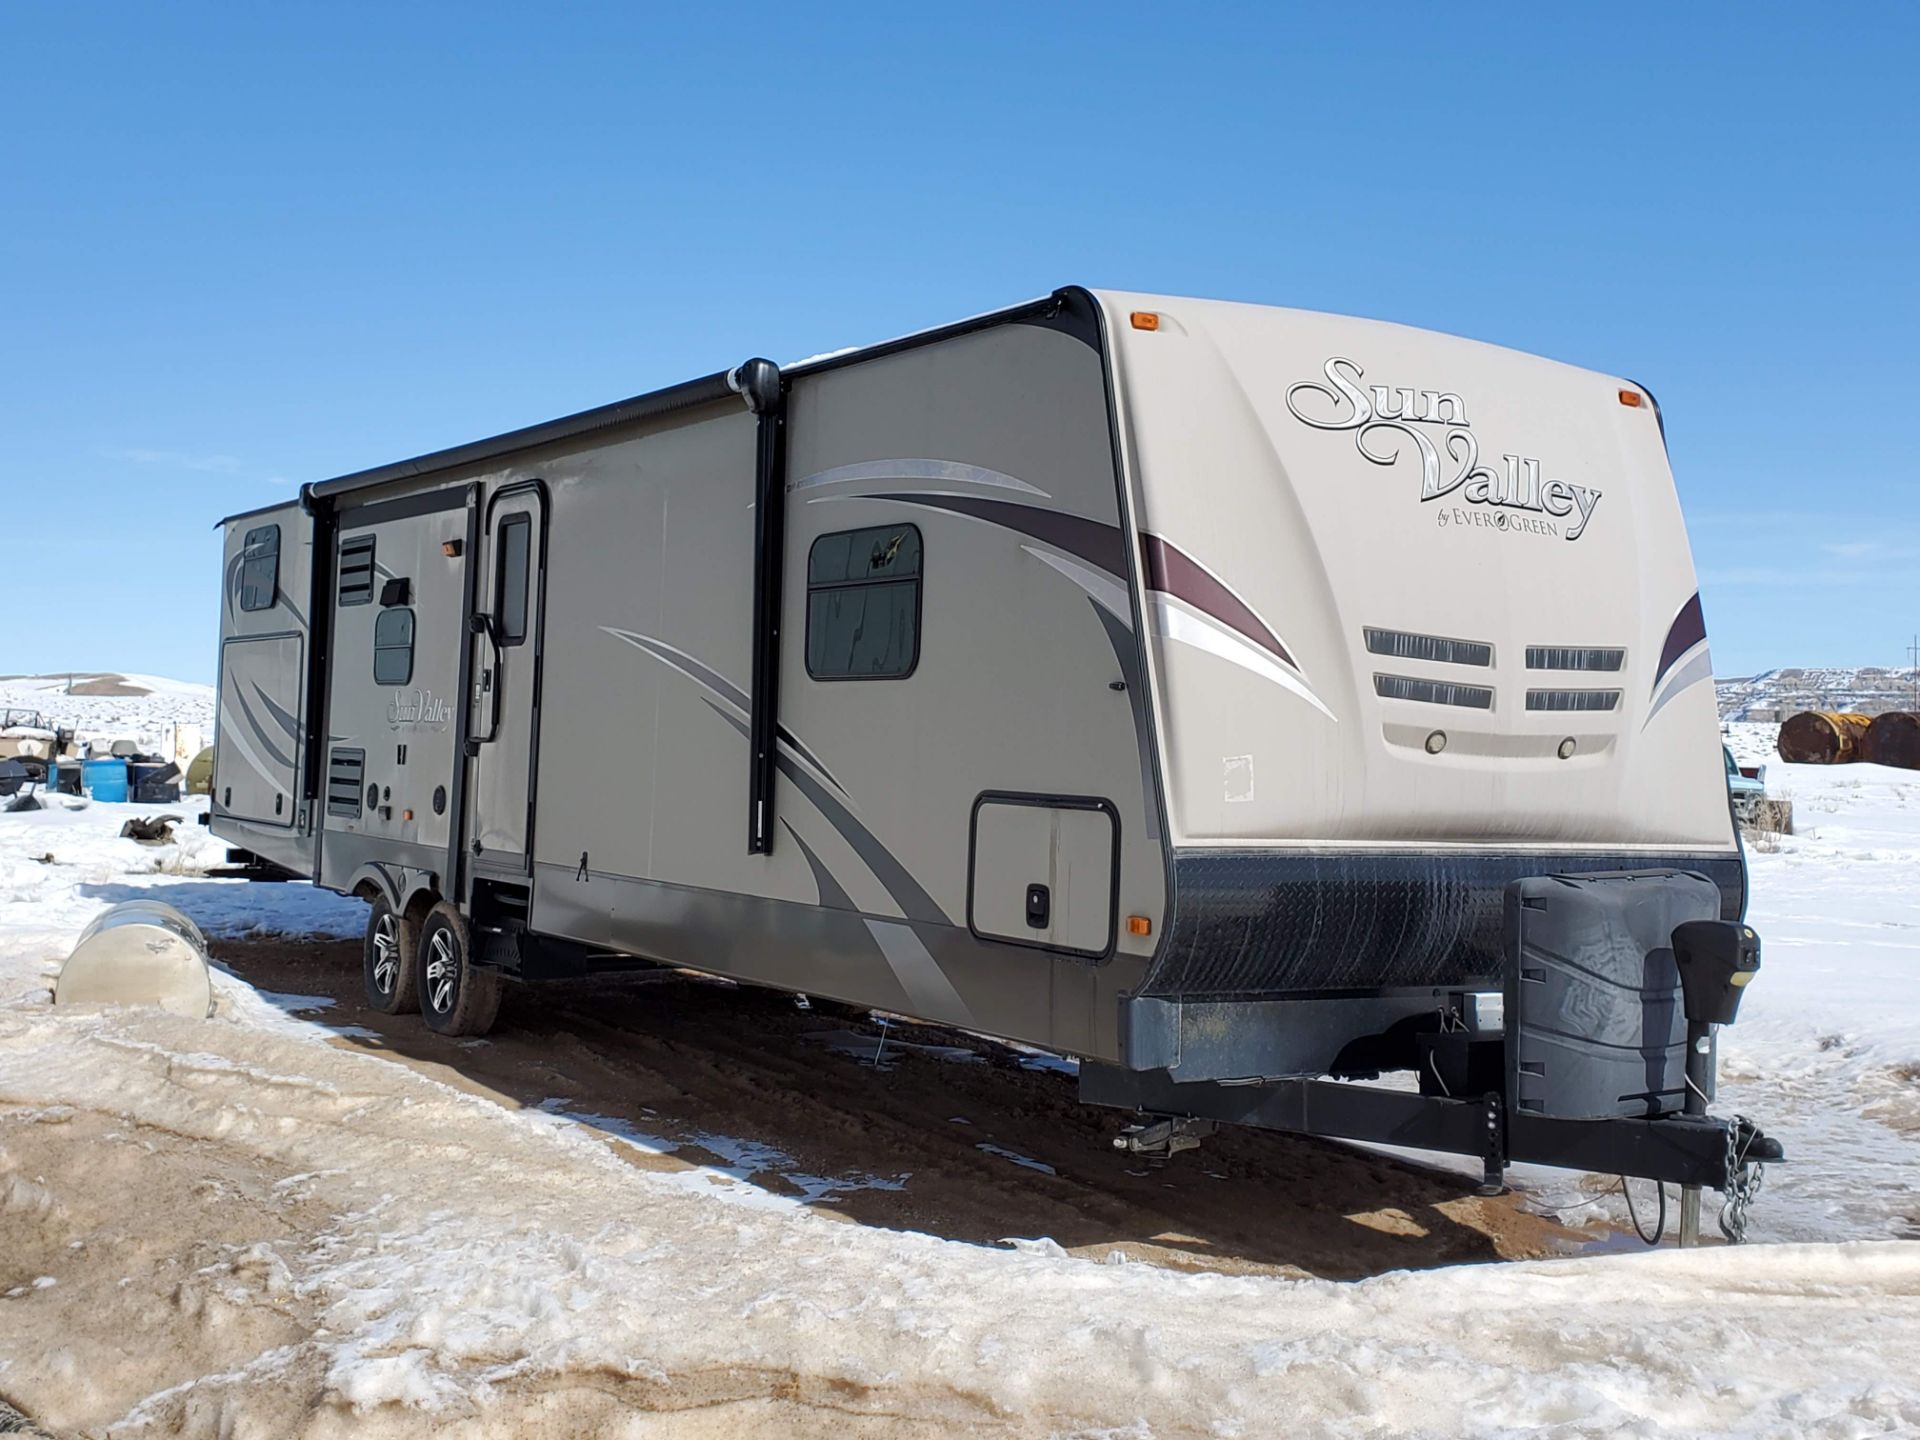 2014 Sun Valley by Evergreen Travel Trailer - Image 4 of 6